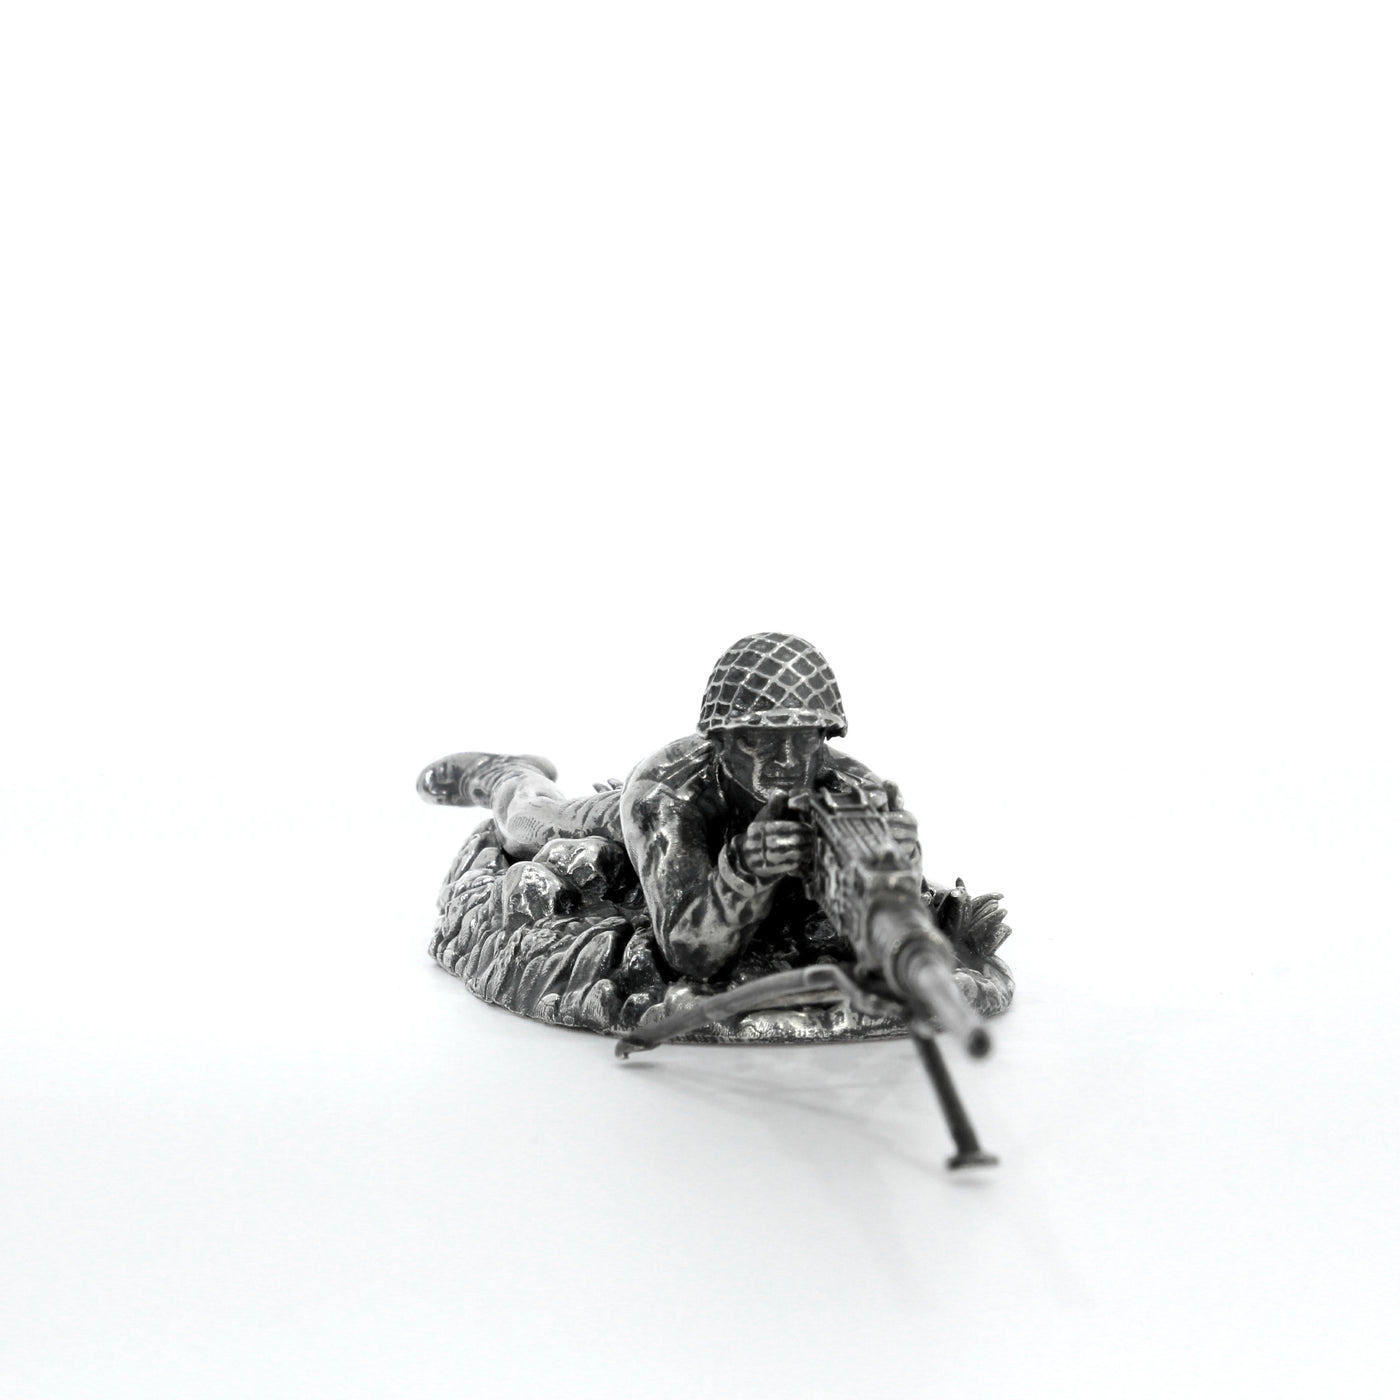 Browning Operator "Trigger Ted" - Silver Soldier - SilverStatues.com